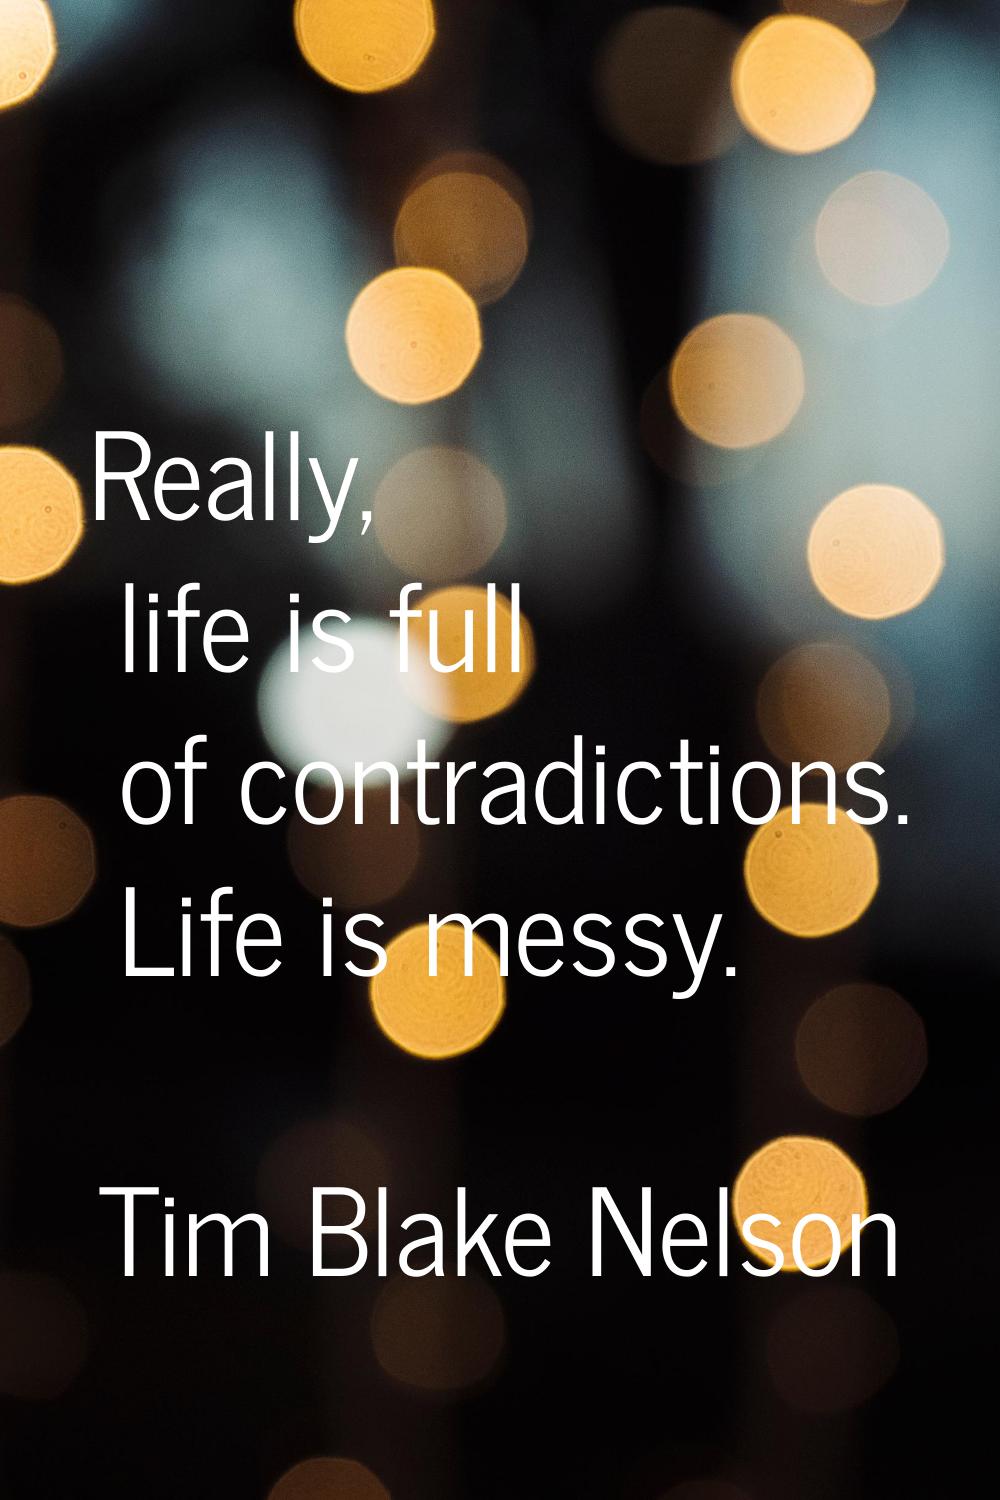 Really, life is full of contradictions. Life is messy.